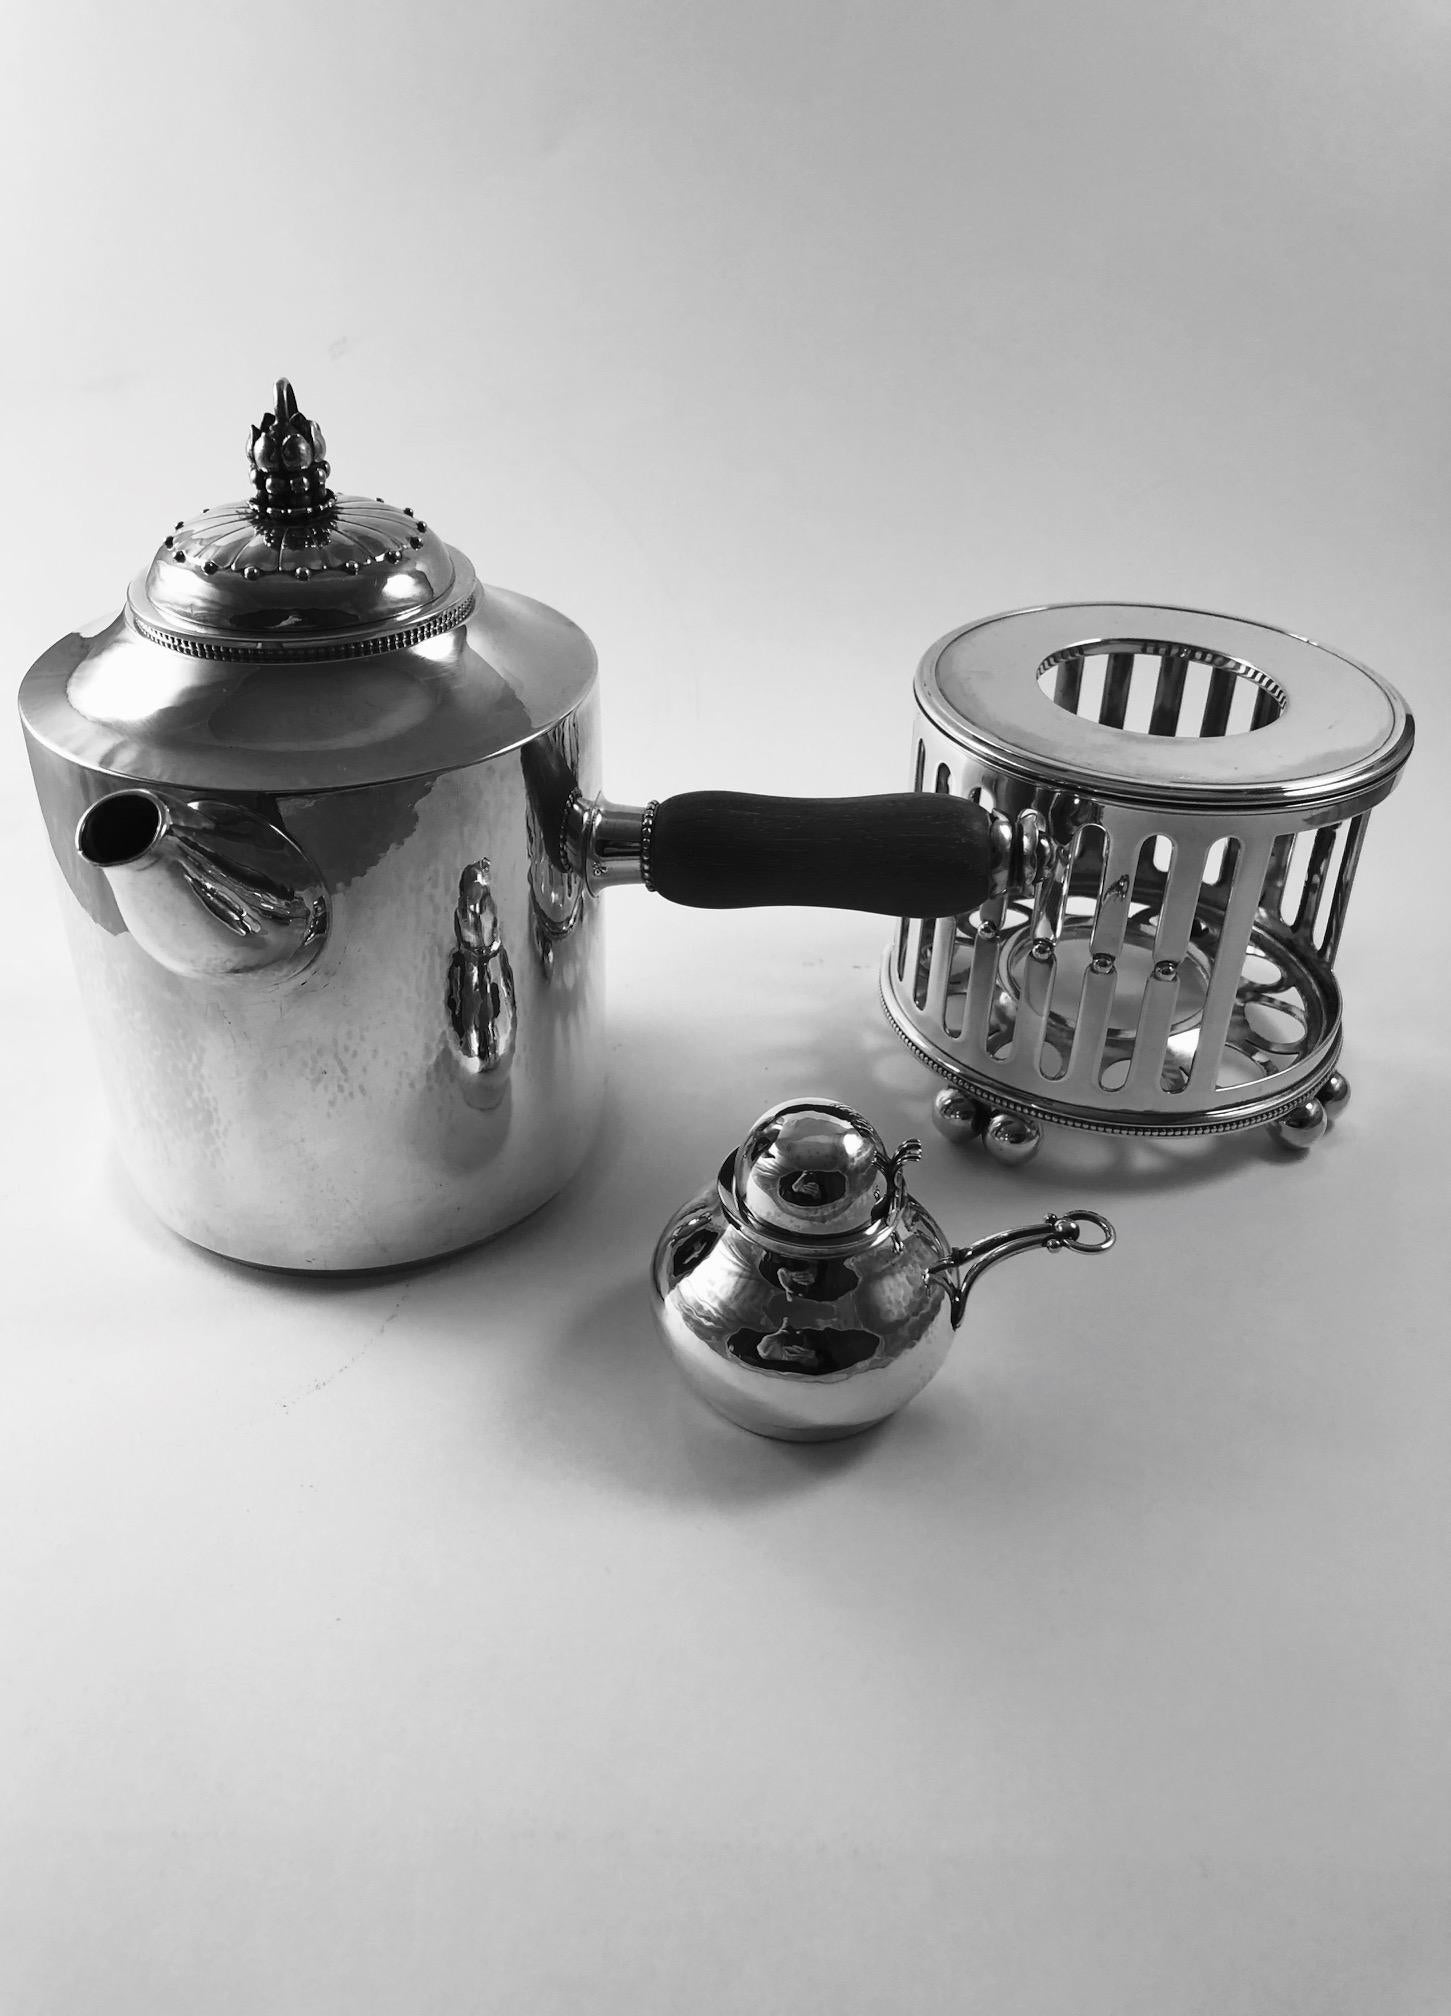 Rare Georg Jensen Paris Coffee and Tea Service with Burner and Tray 483 1